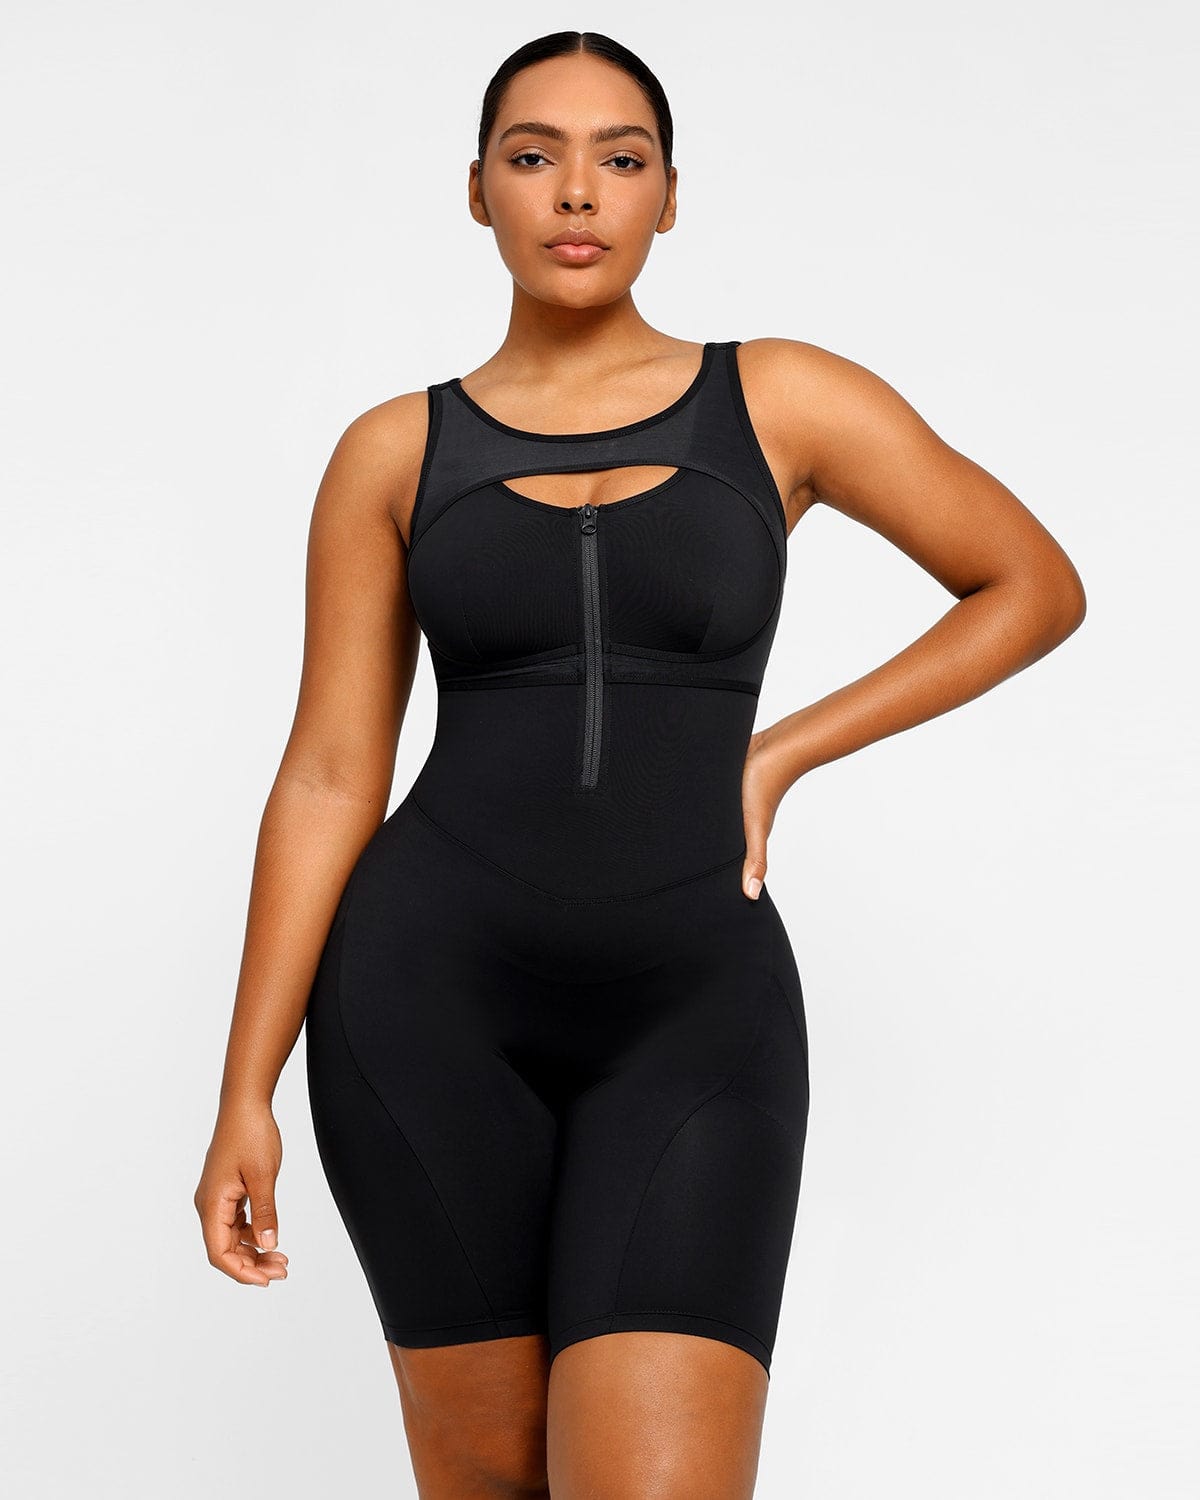 Workout Best Sellers for Women